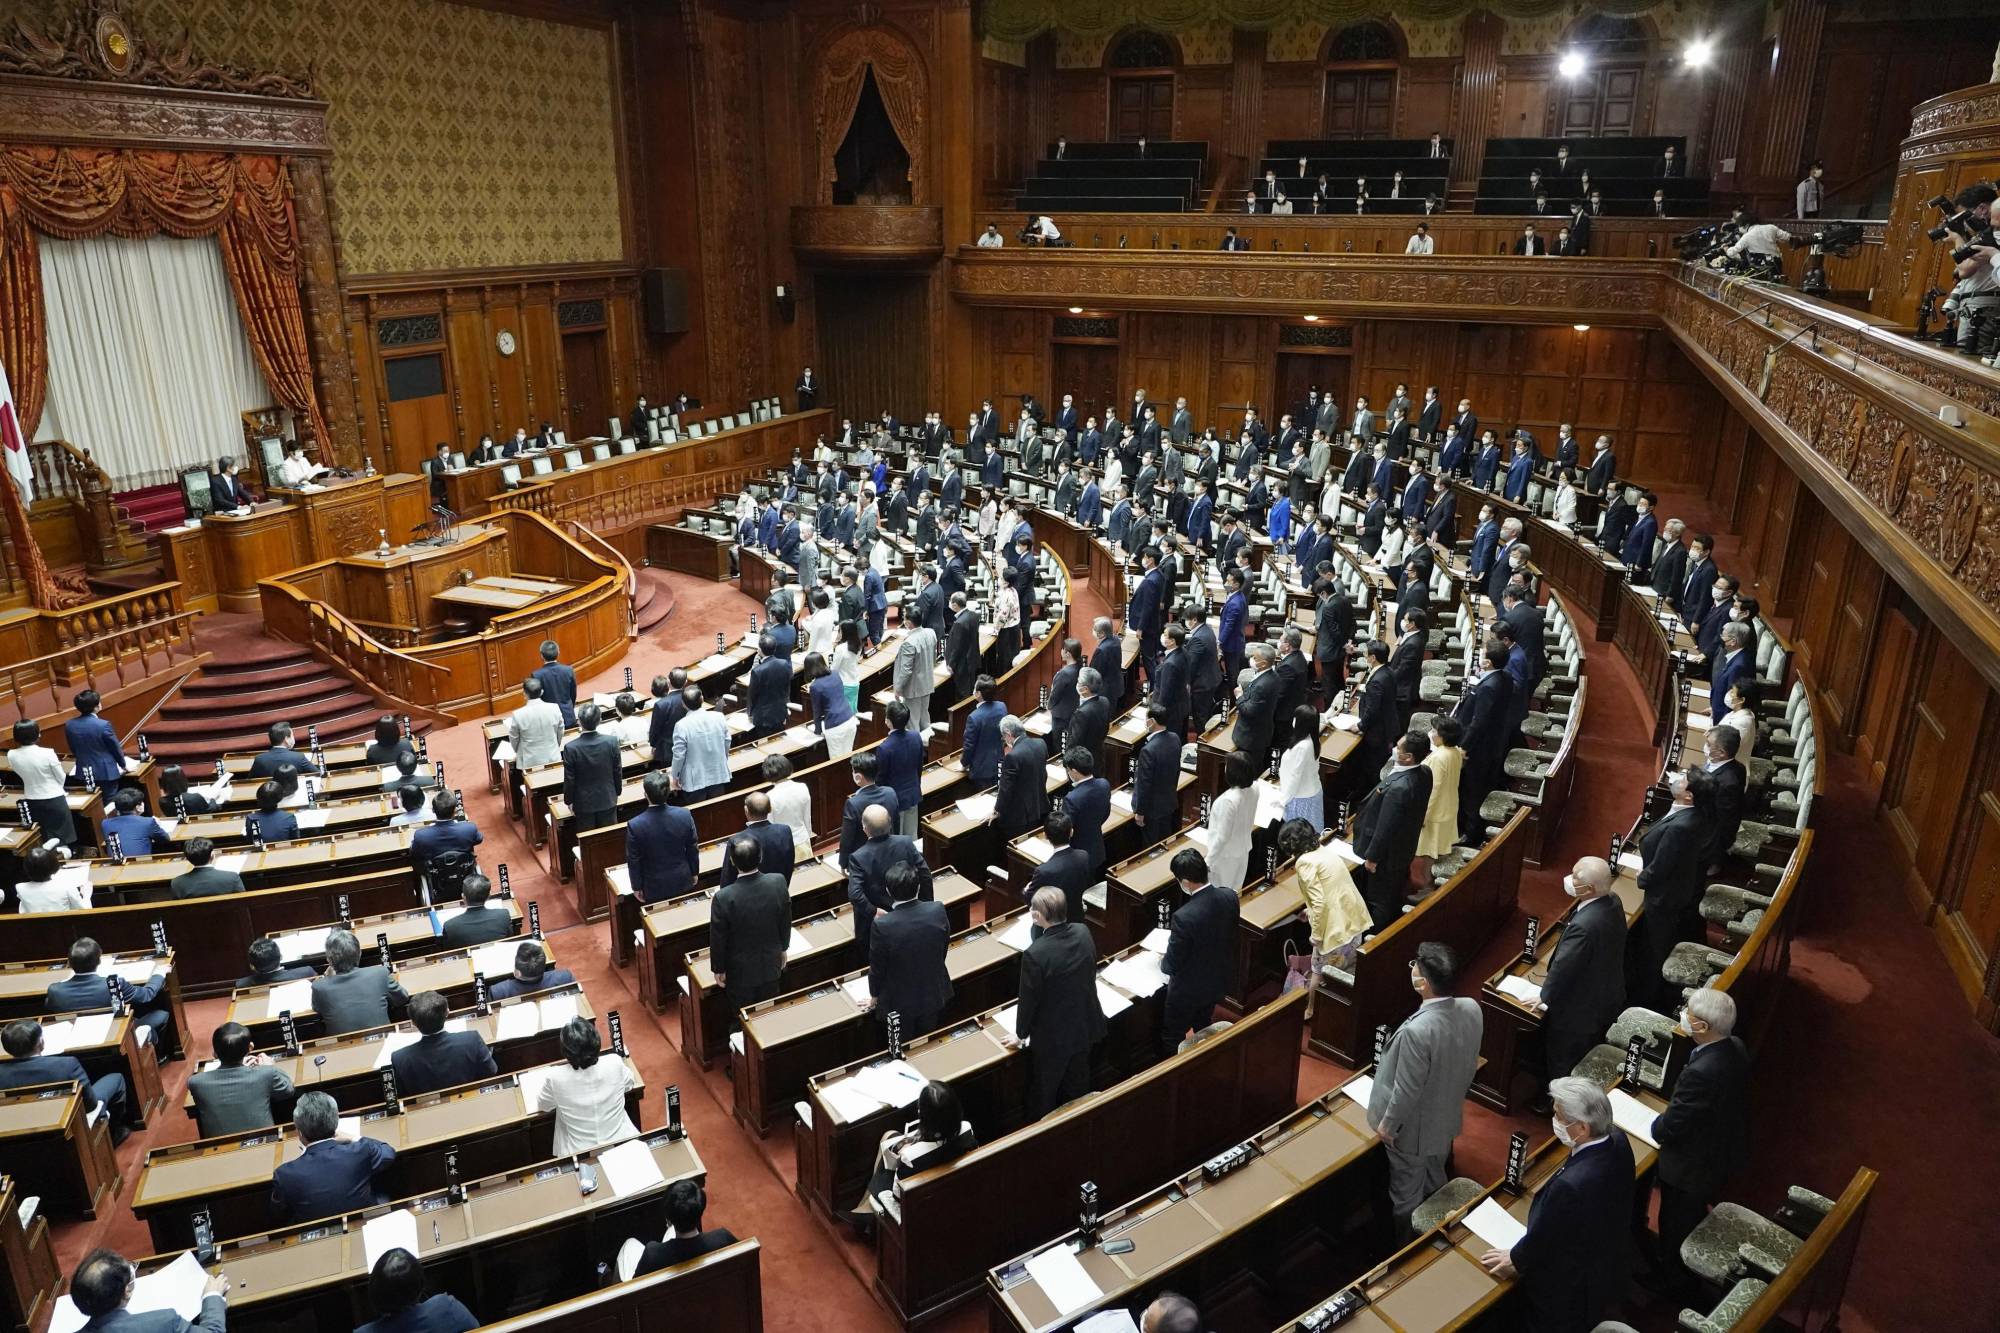 A bill to revise the Penal Code to introduce tougher penalties for online insults is passed at an Upper House plenary session Monday. | KYODO